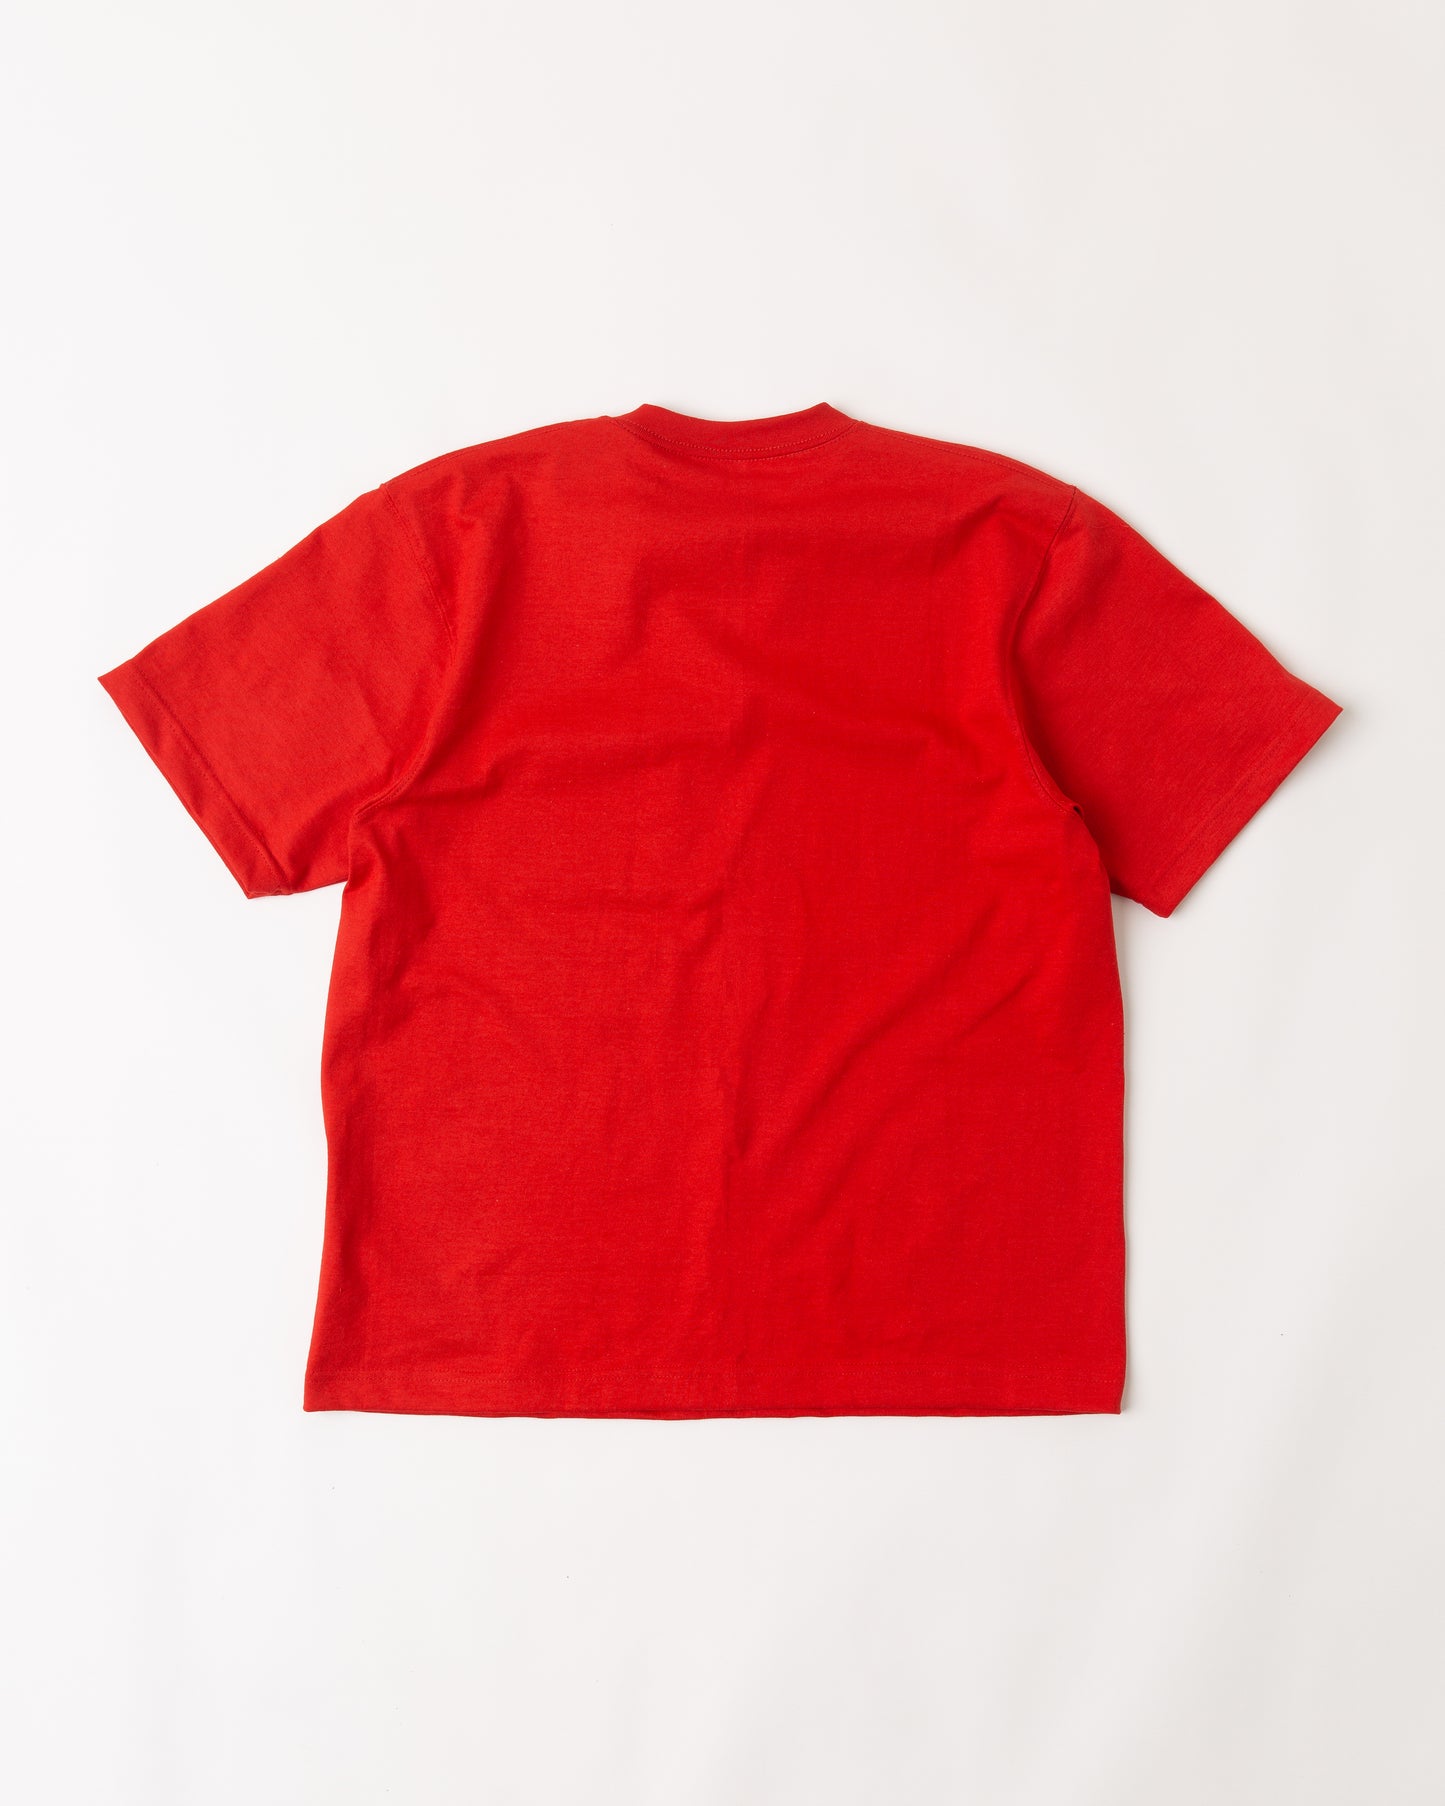 CAMBER USA MAX-WEIGHT POCKET TEE: RED